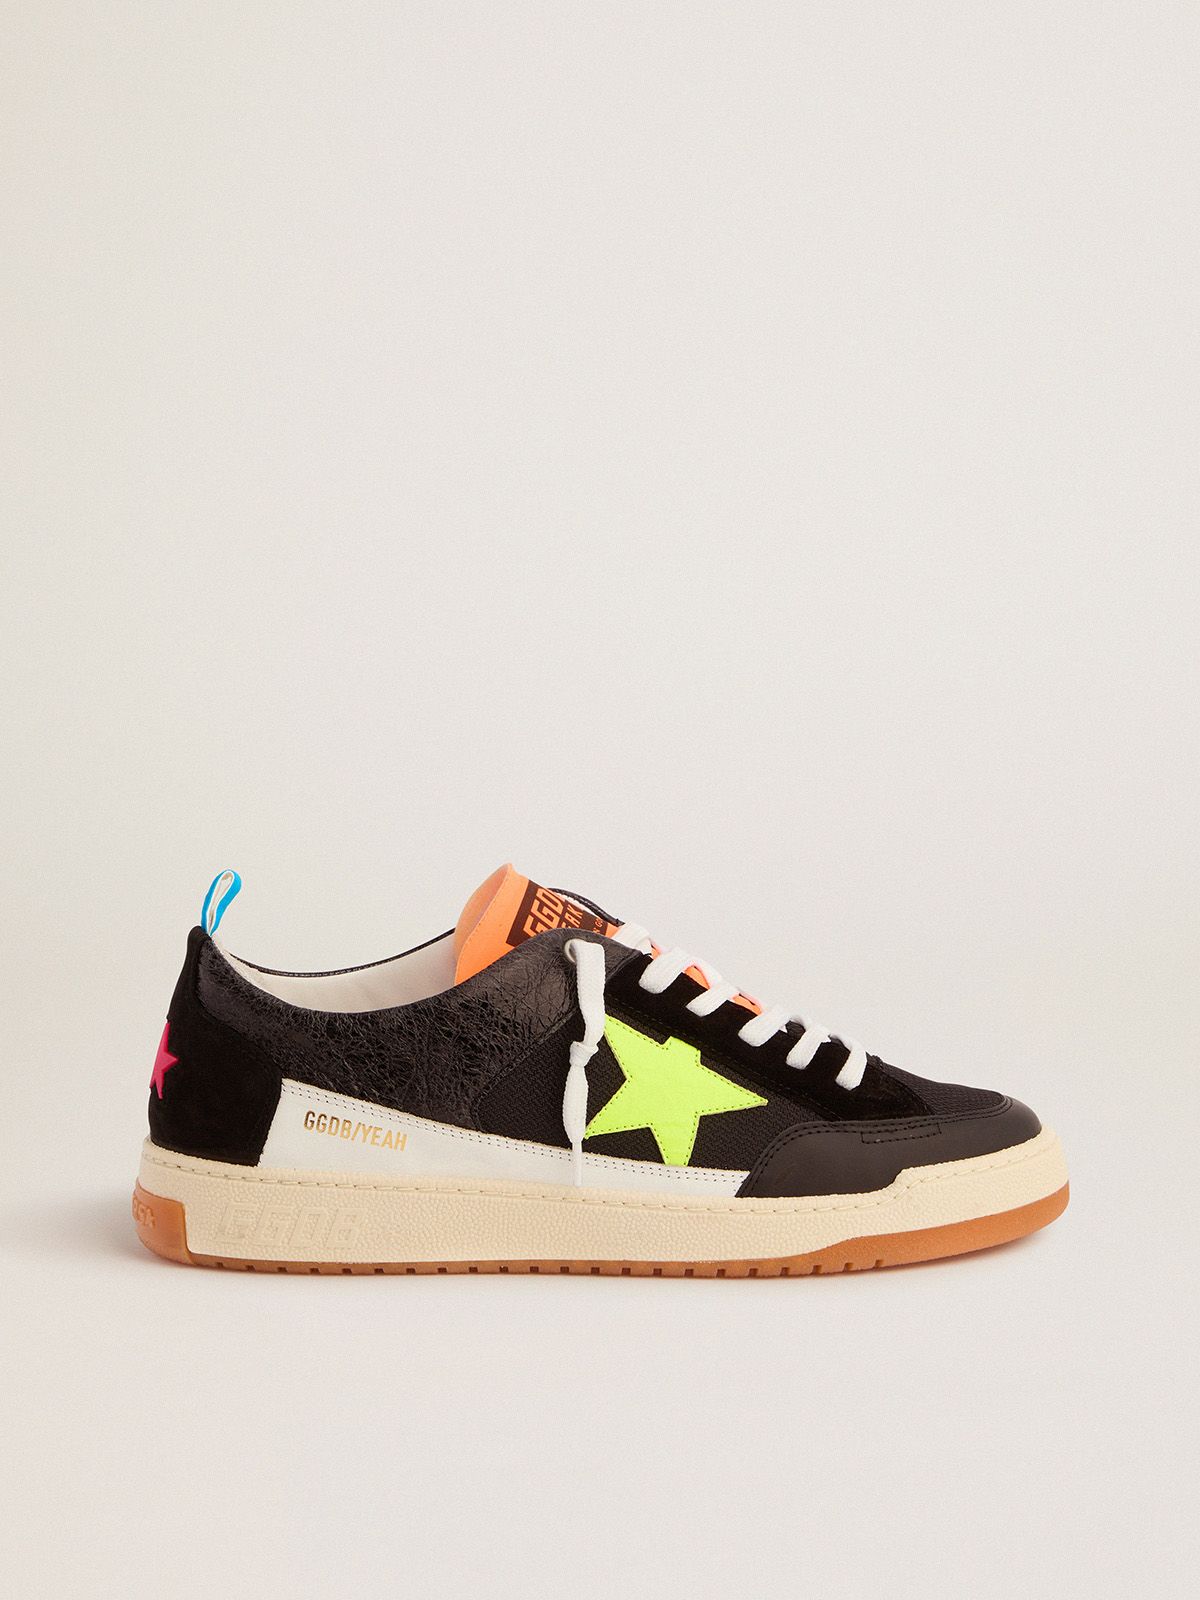 Men’s black Yeah sneakers with fluorescent yellow star